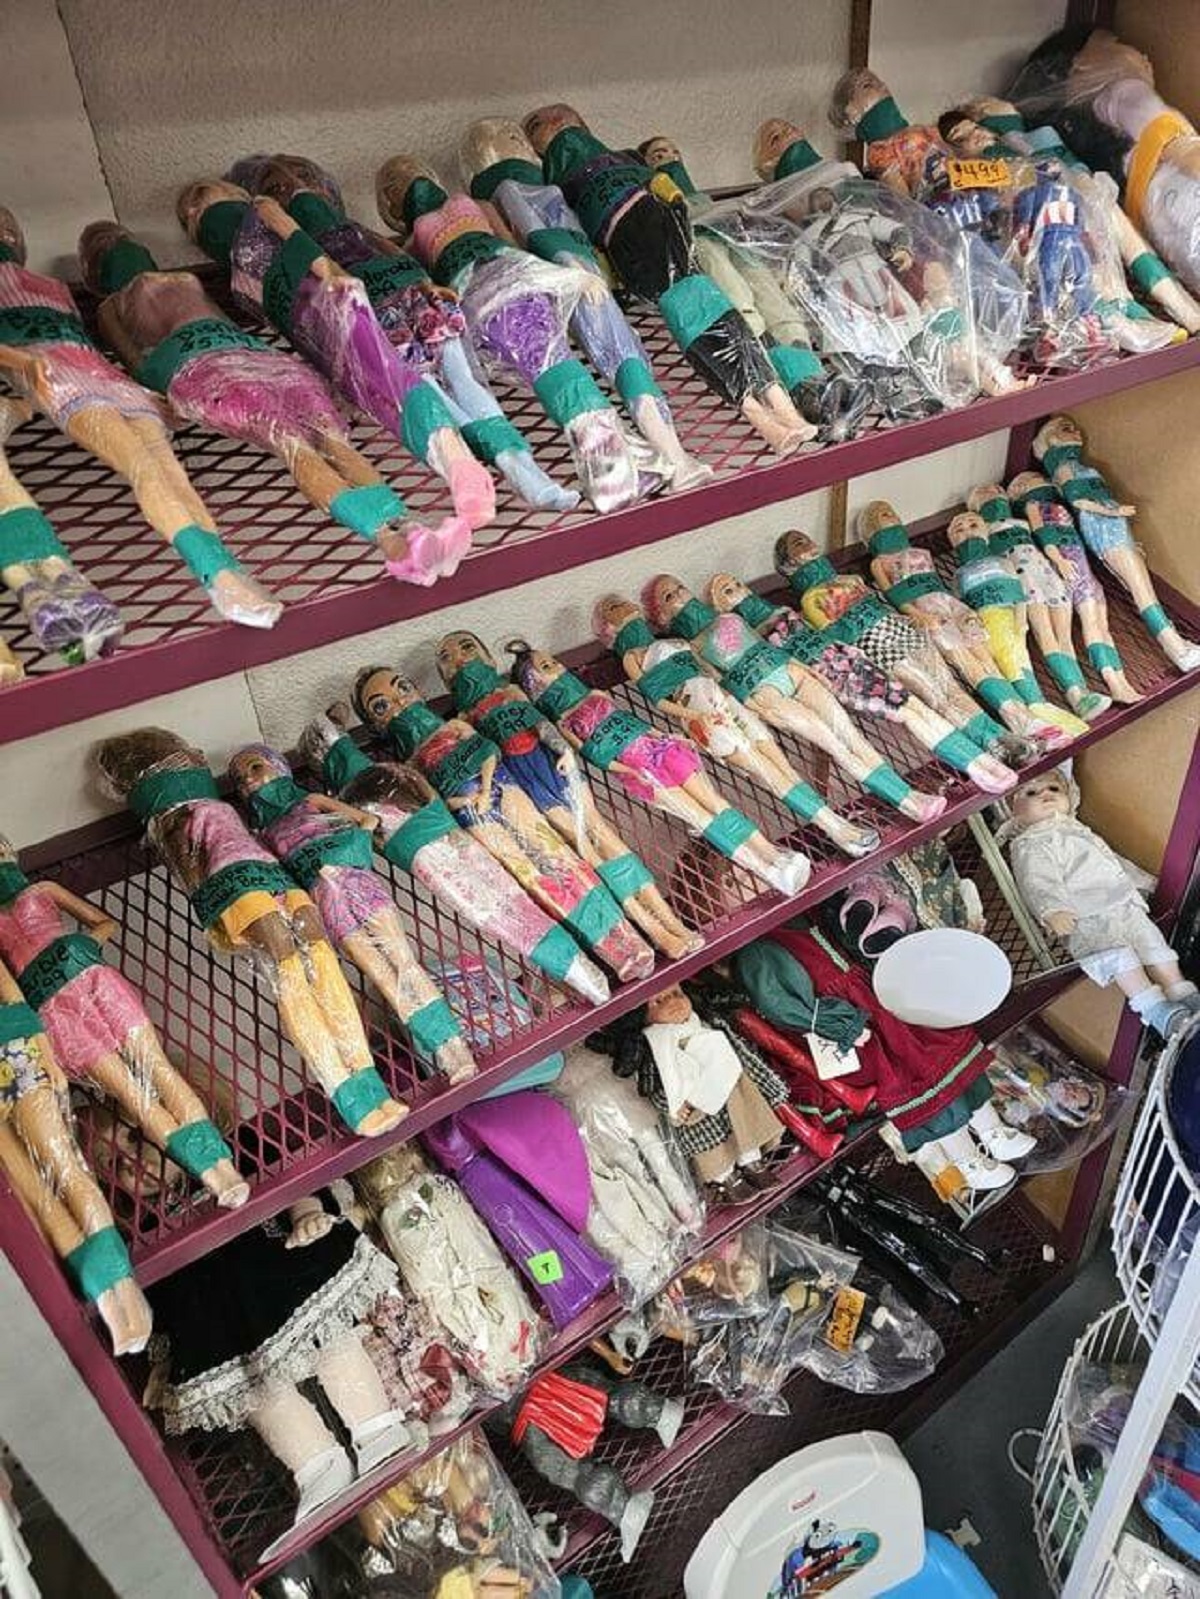 "Local thrift store has all its dolls tied up"